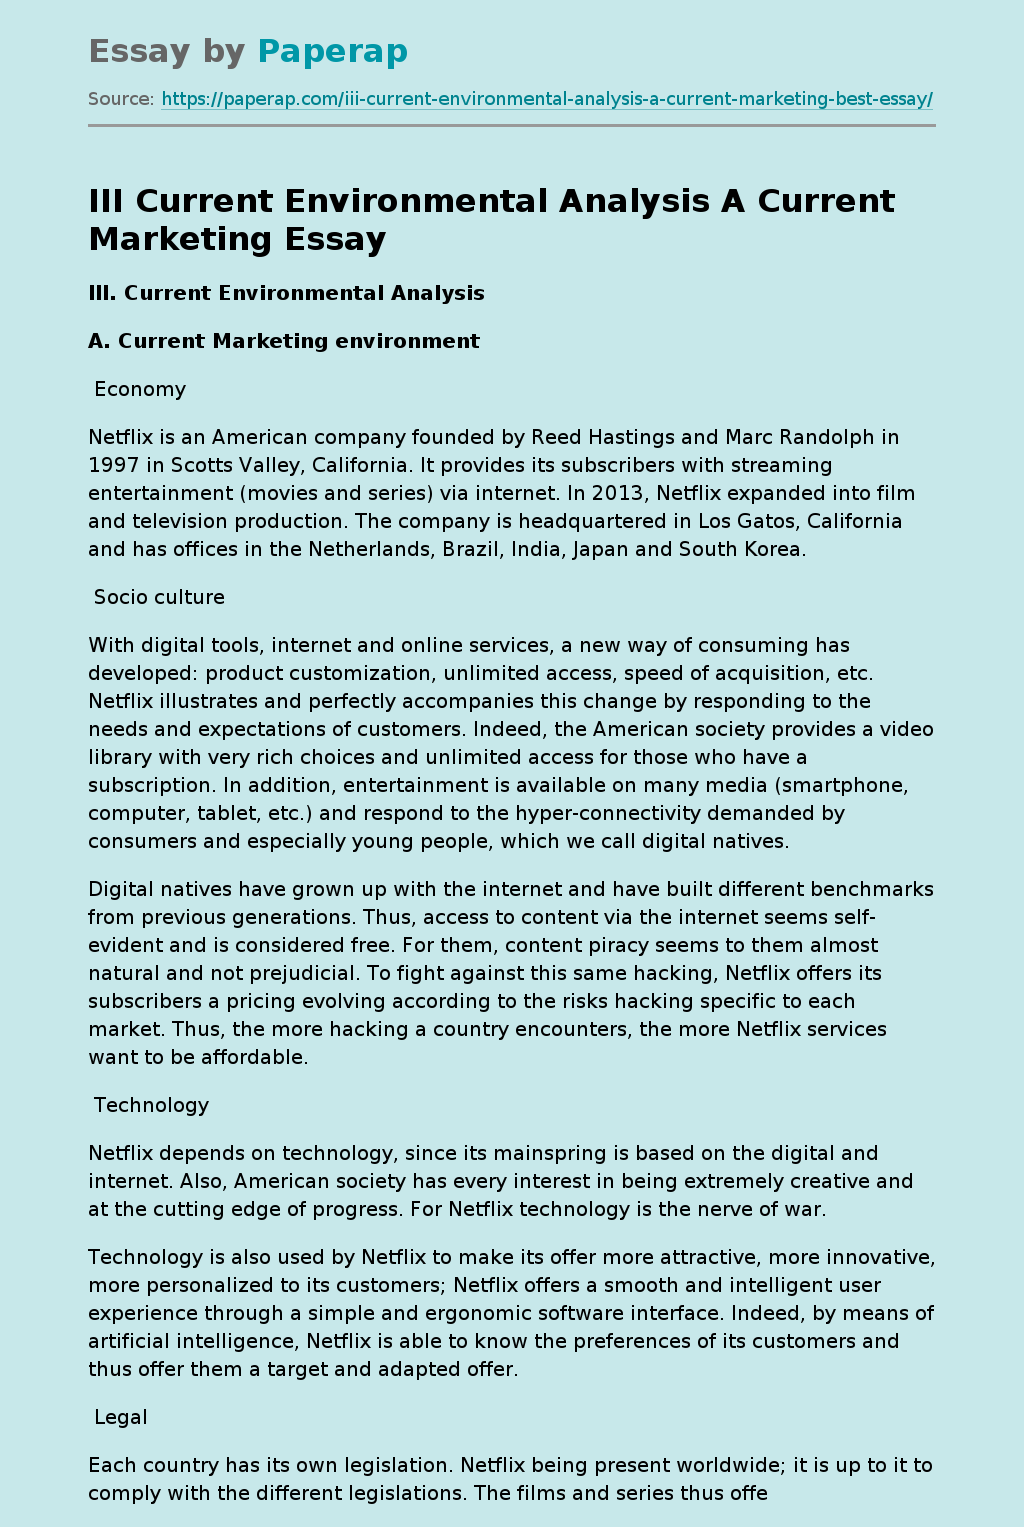 III Current Environmental Analysis A Current Marketing